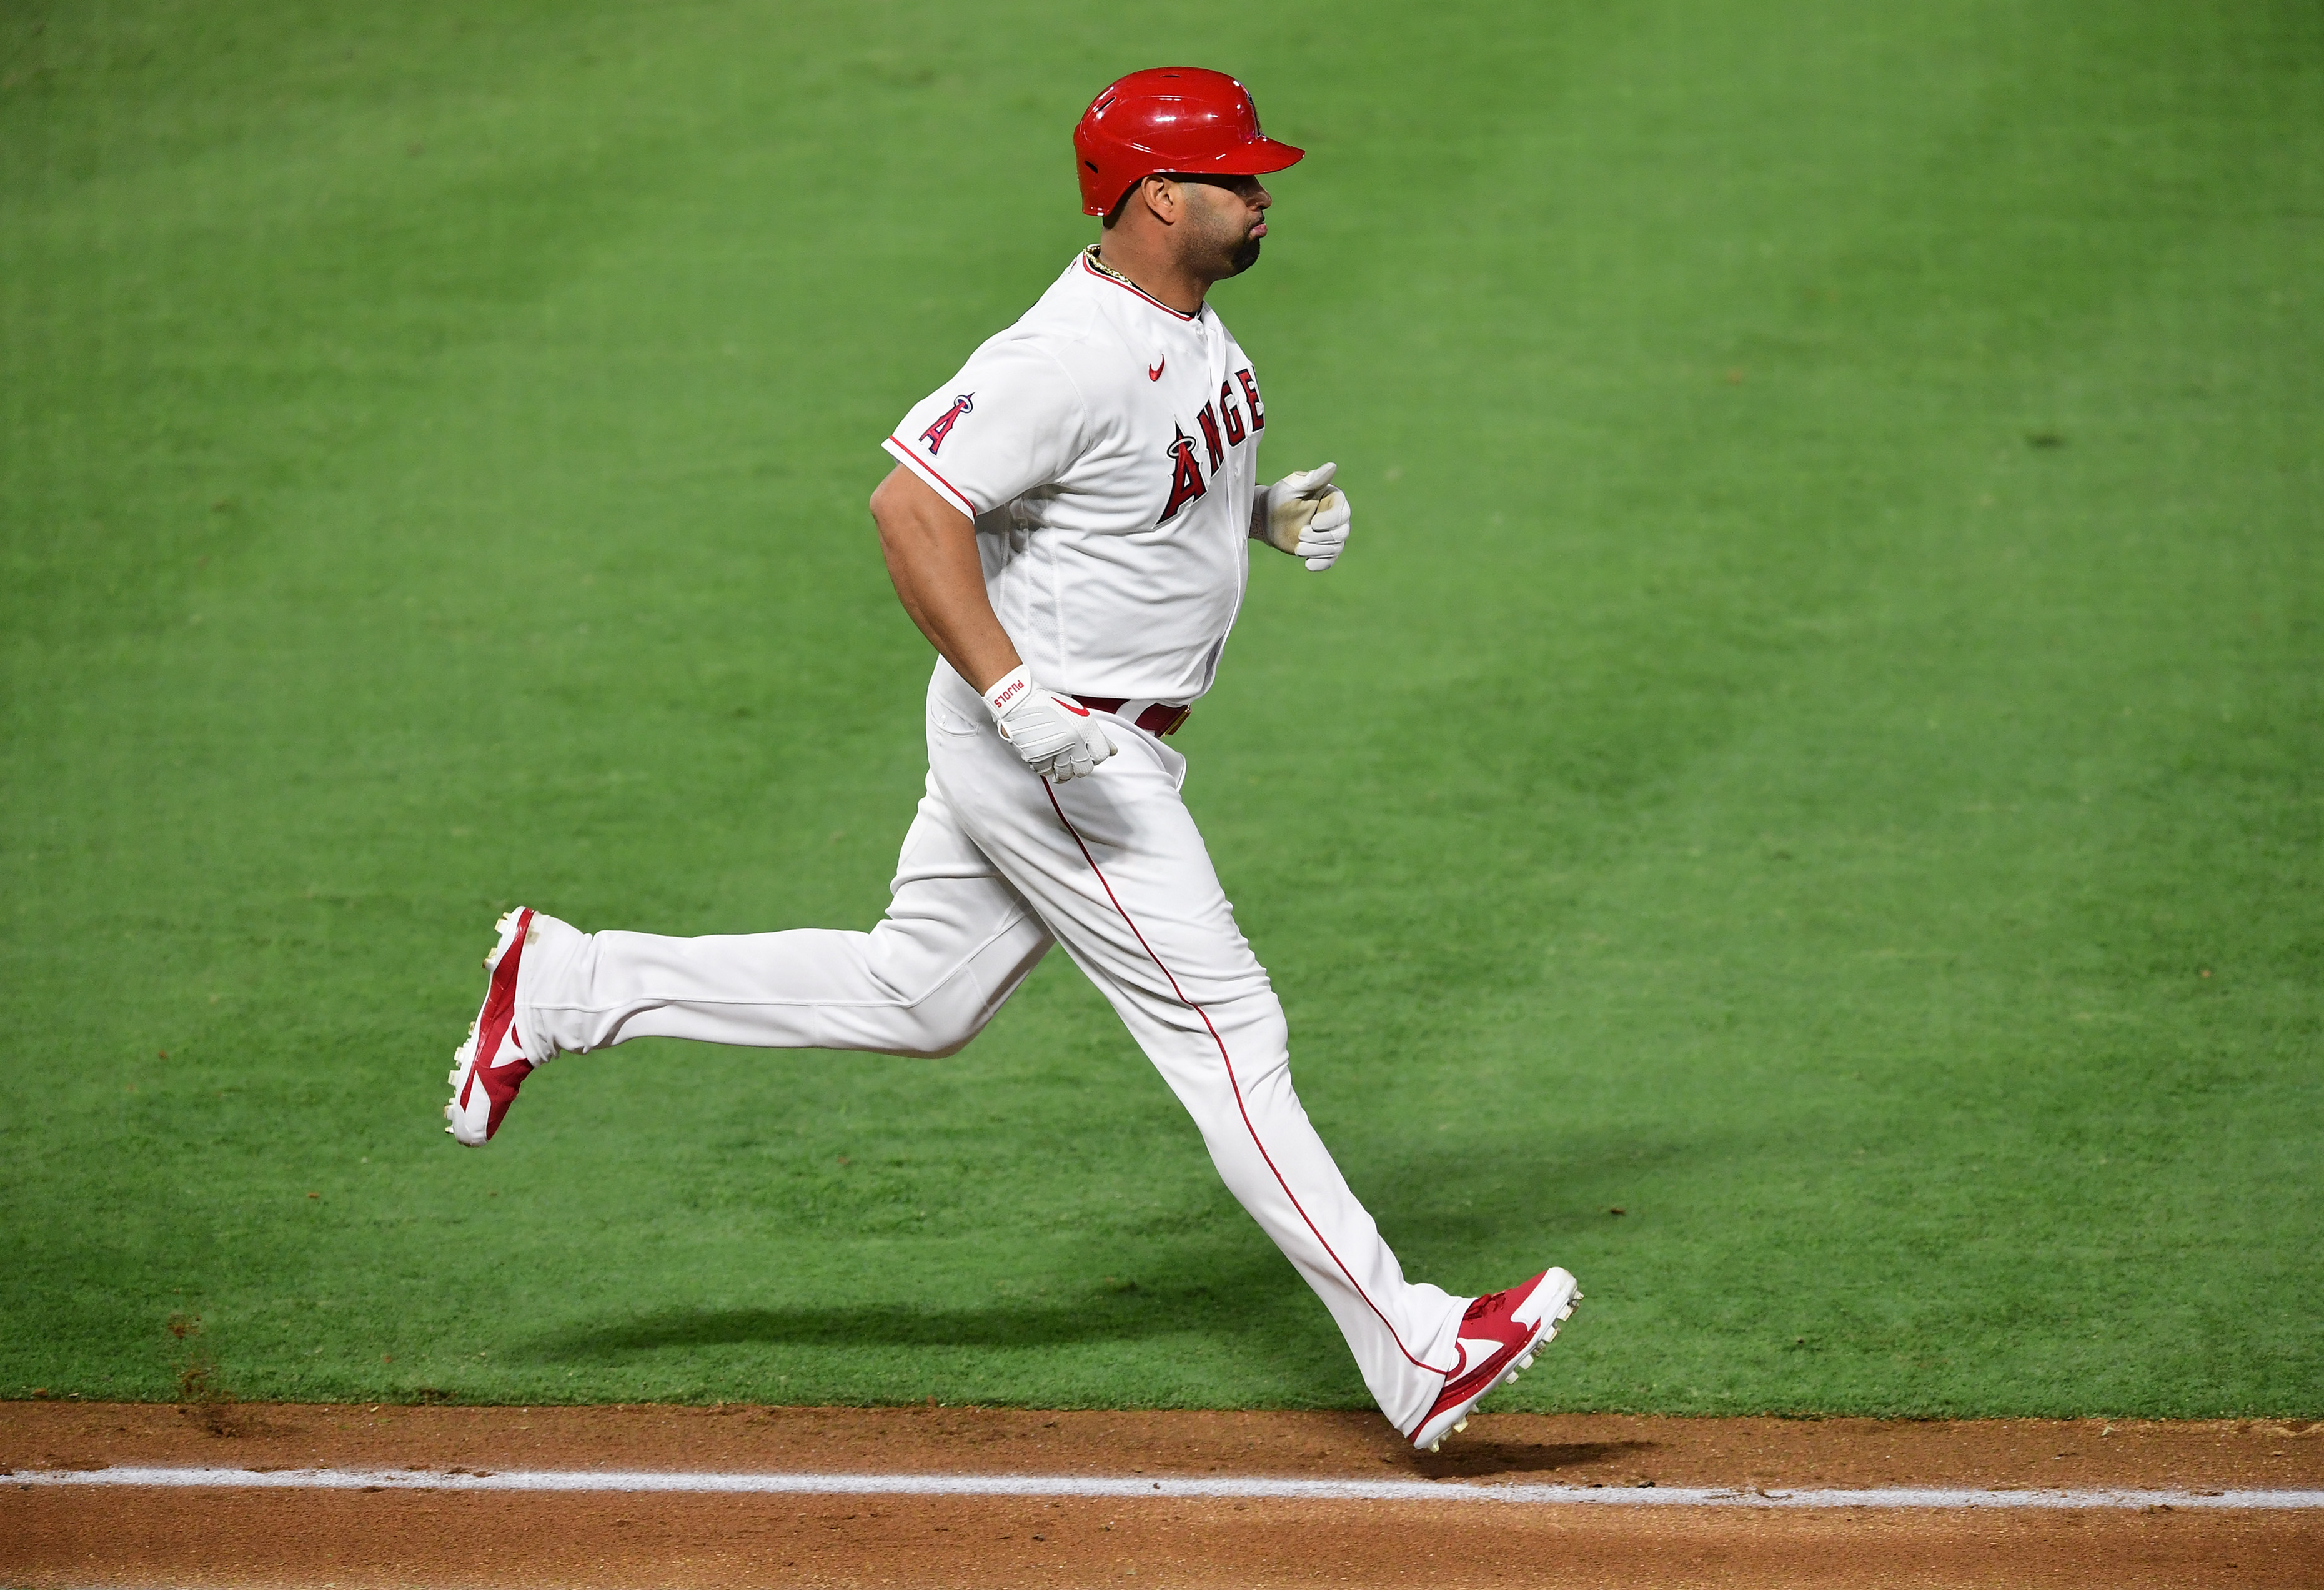 Albert Pujols passed WIllie Mays for fifth in home runs with 661.